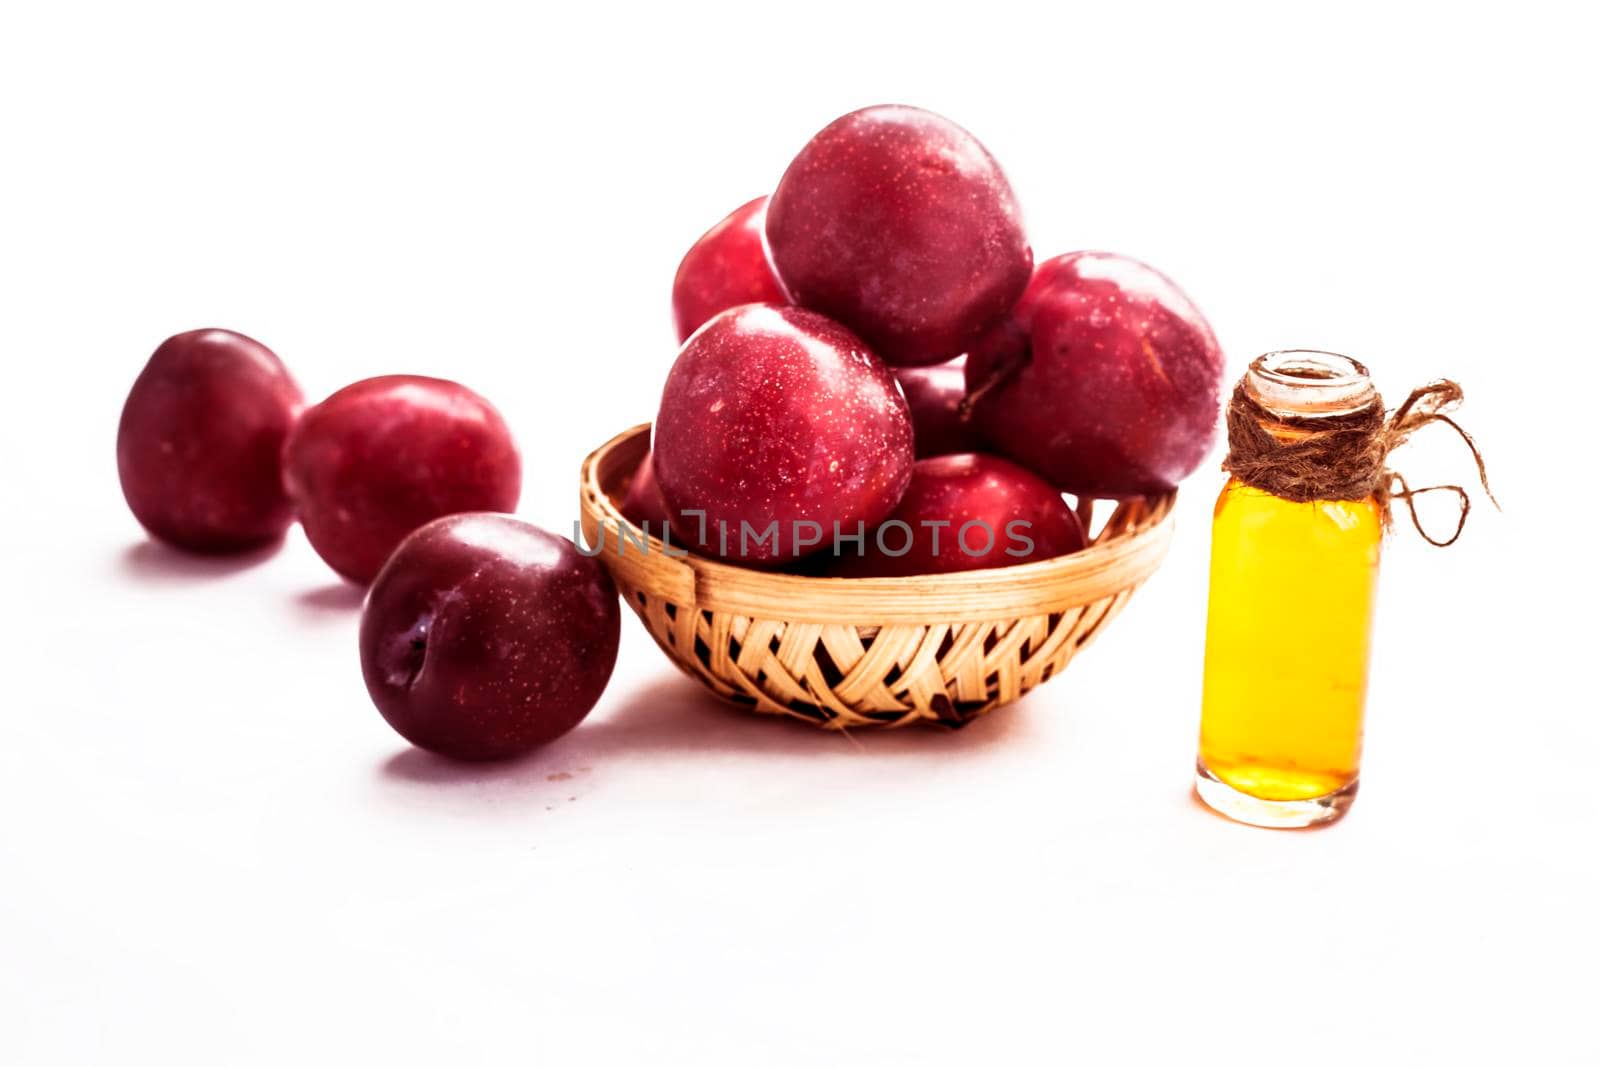 Raw organic red ripe plums in a brown-colored basket along with its extracted essential oil in a transparent glass bottle isolated on white.